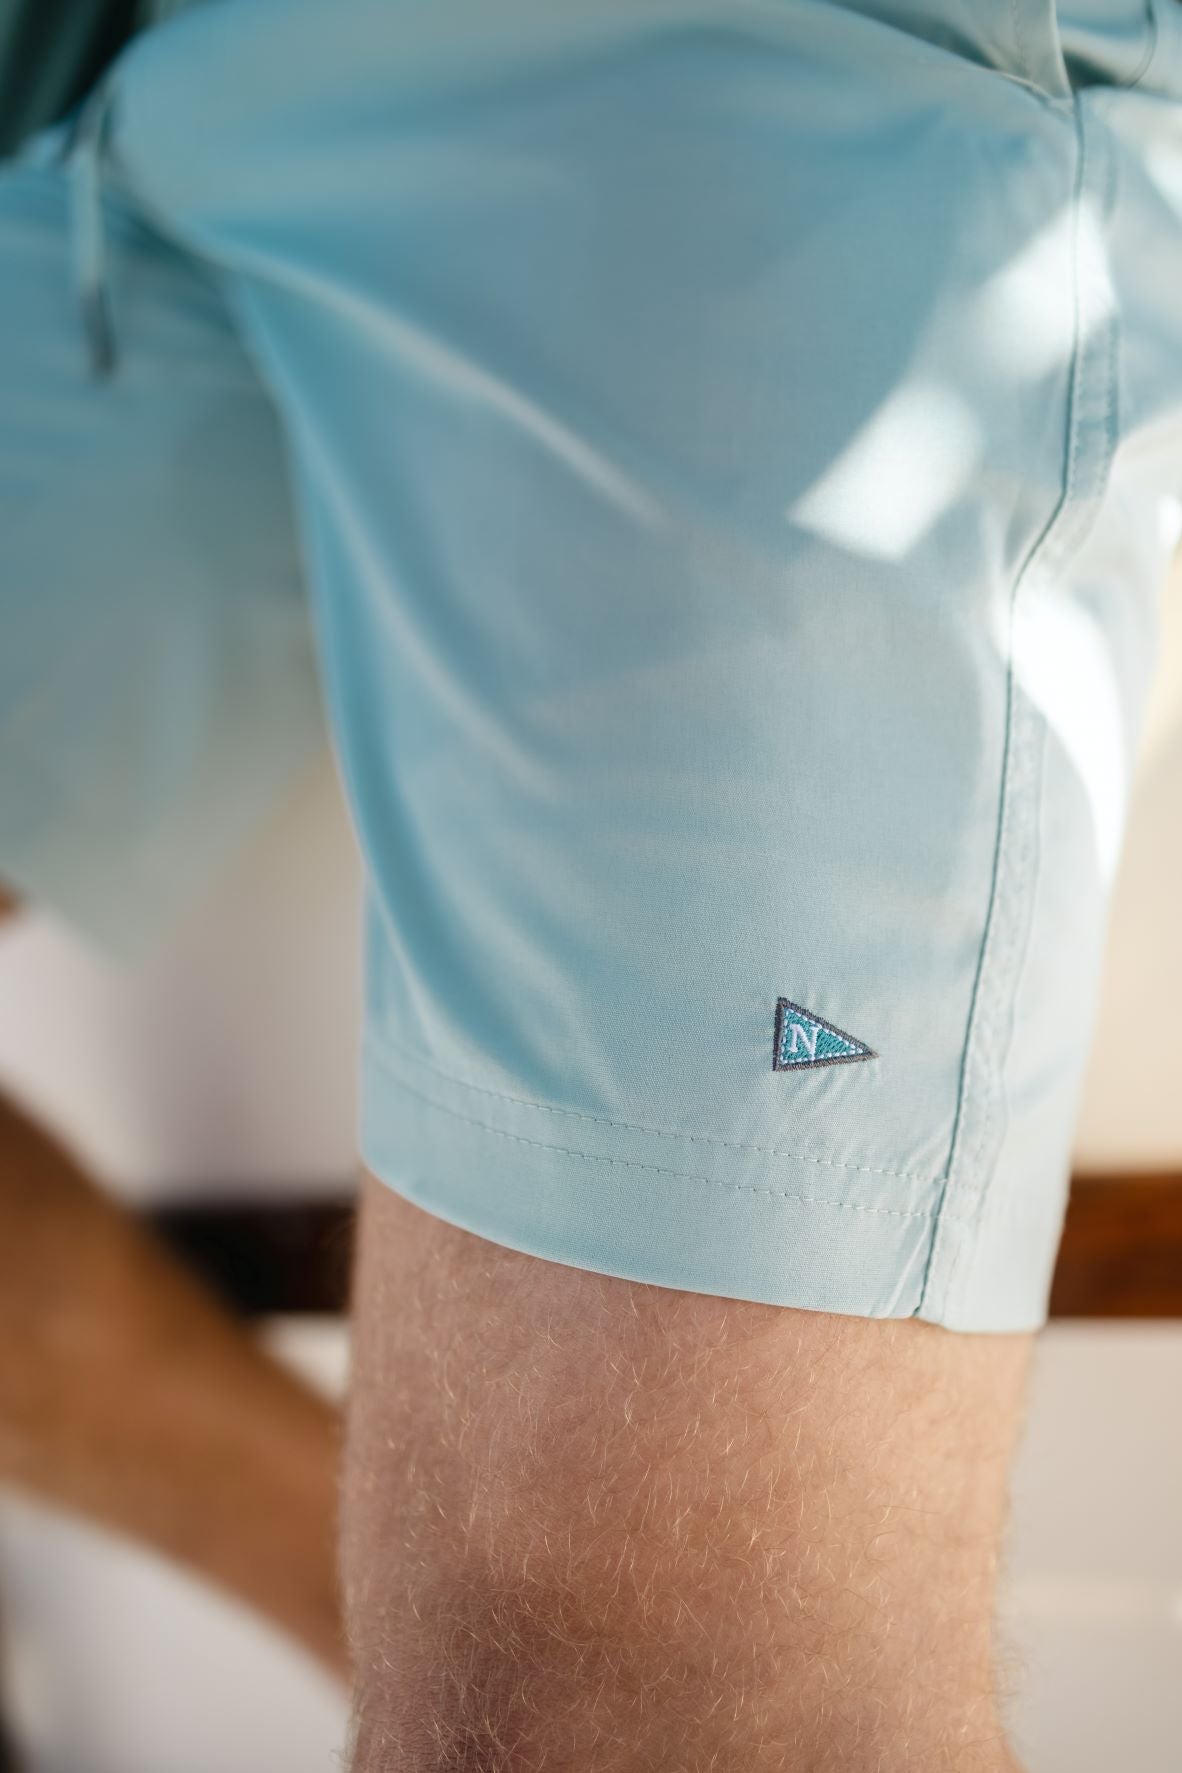 Model wearing the Bamboo Lined Sabalo Fishing Shorts. These fishing shorts are perfect for long days on the water.